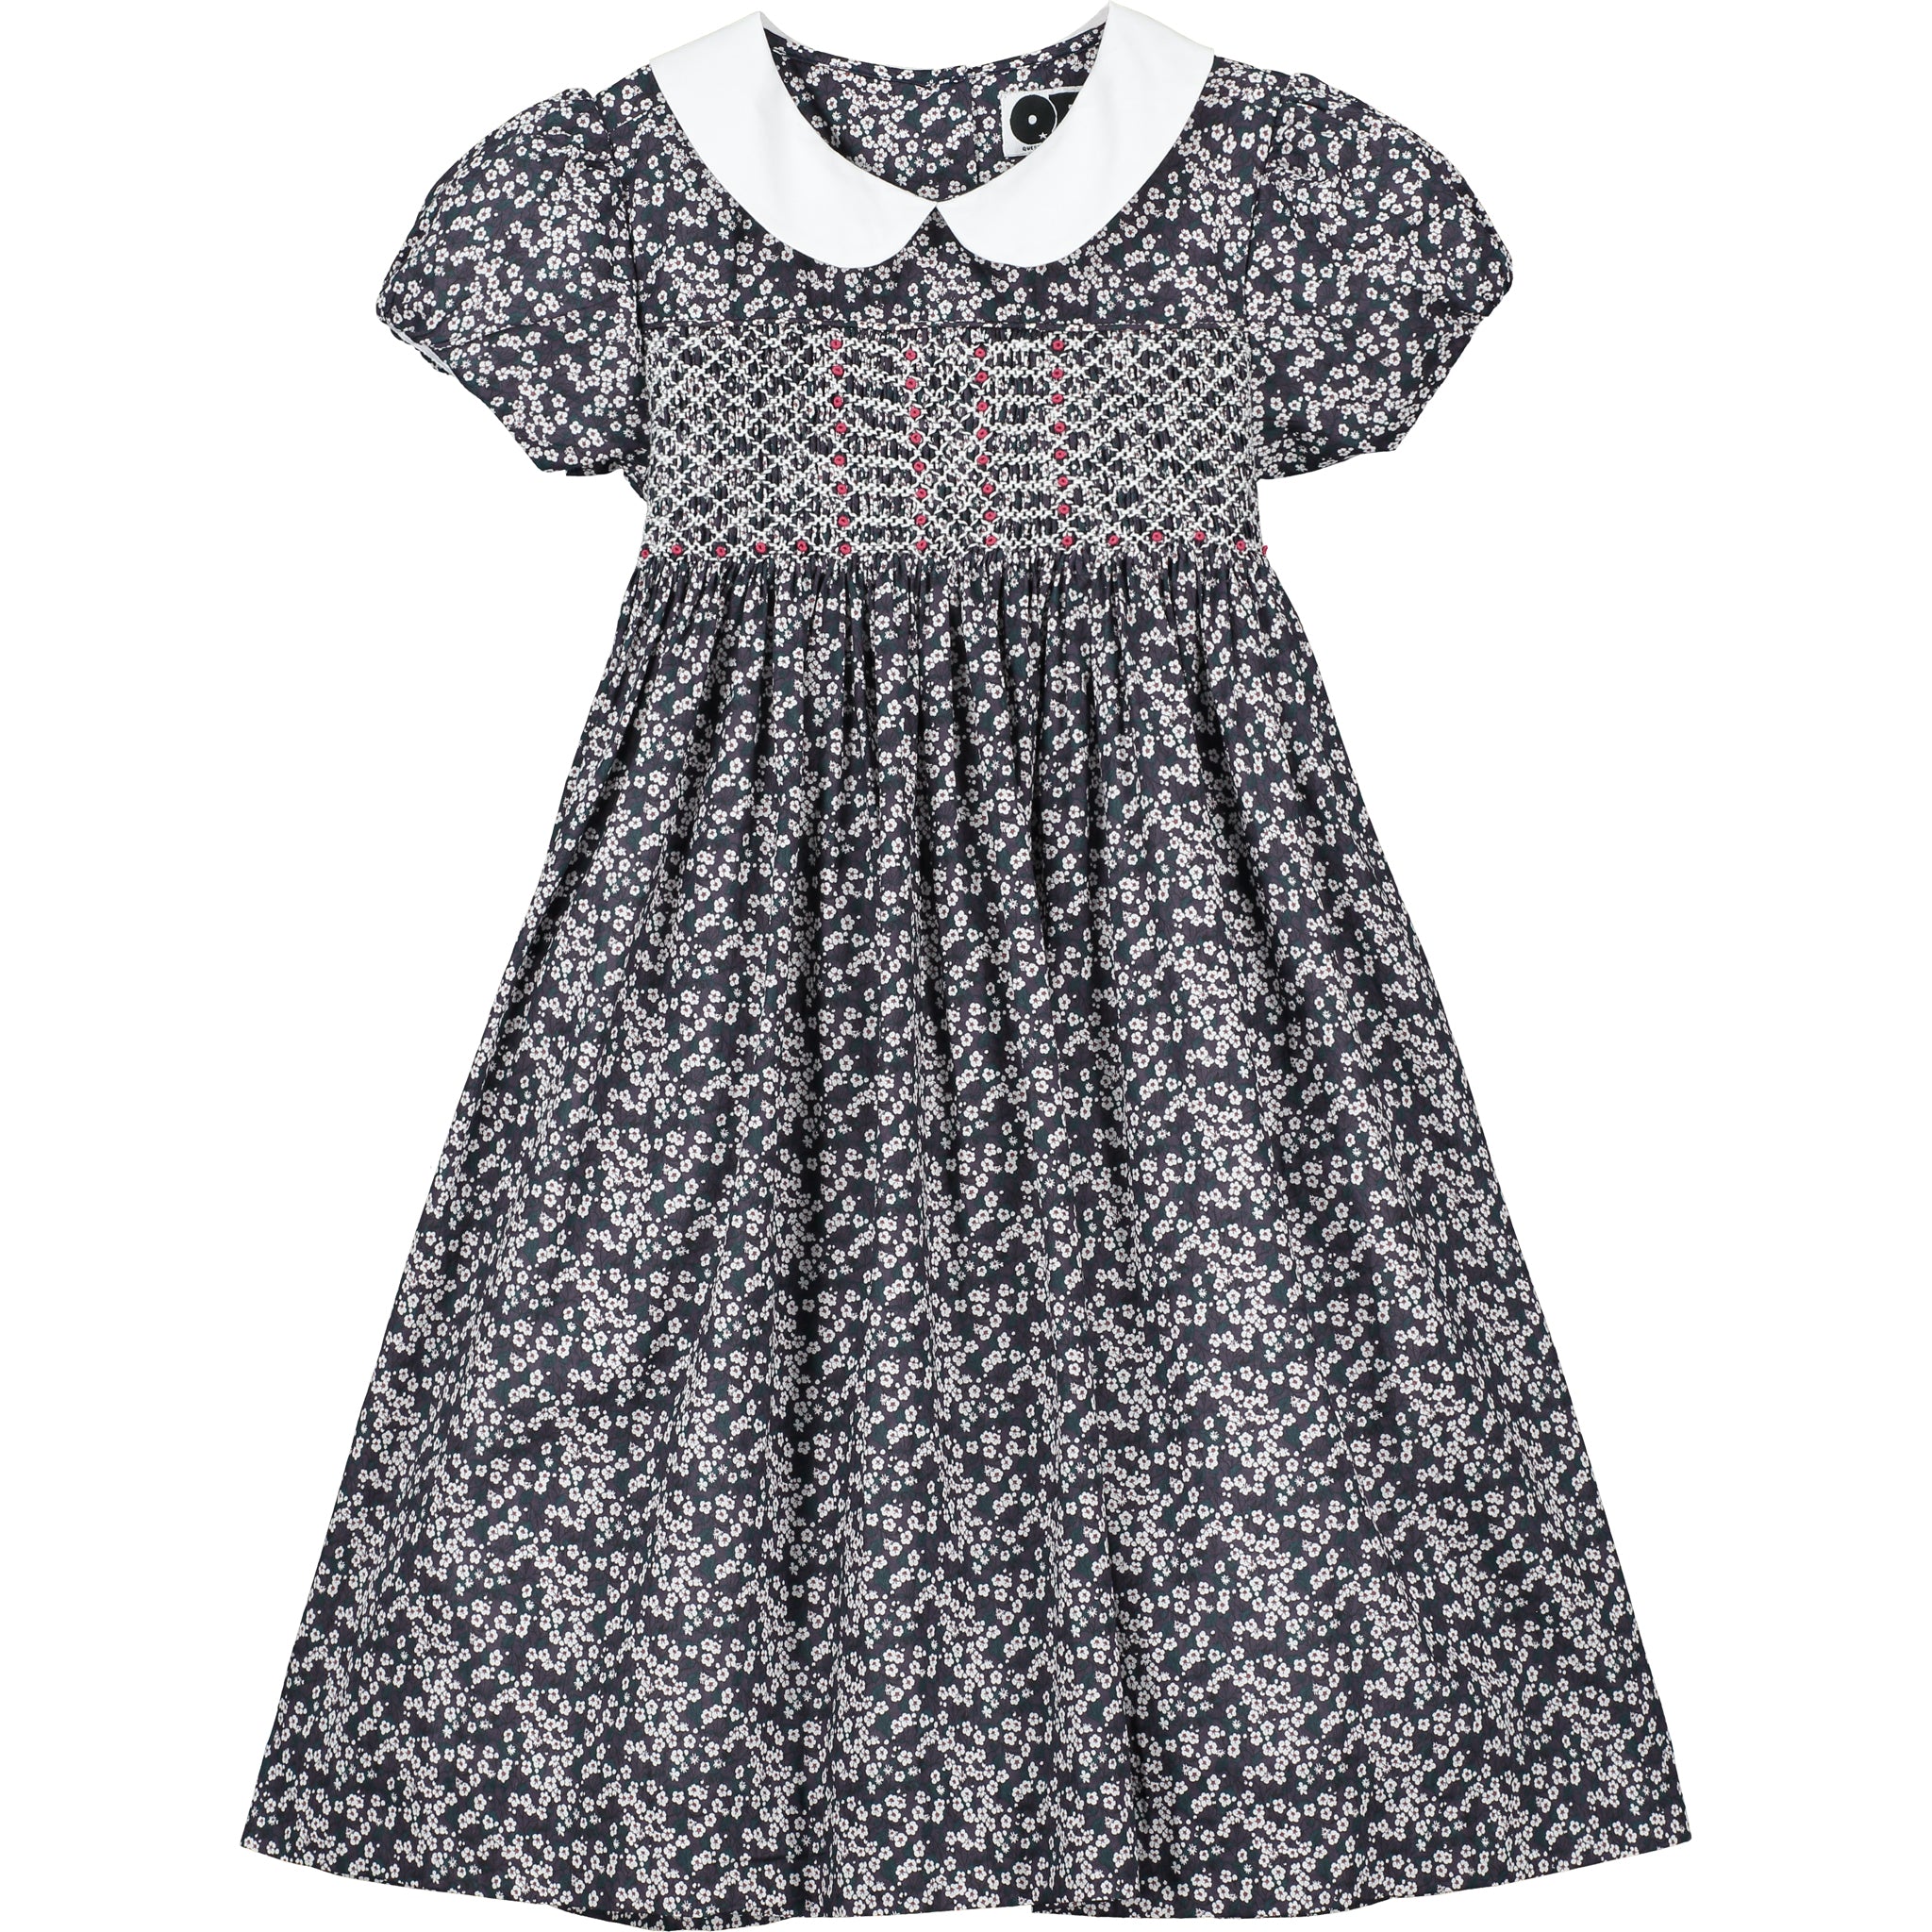 Navy Liberty print girl's floral dress, front